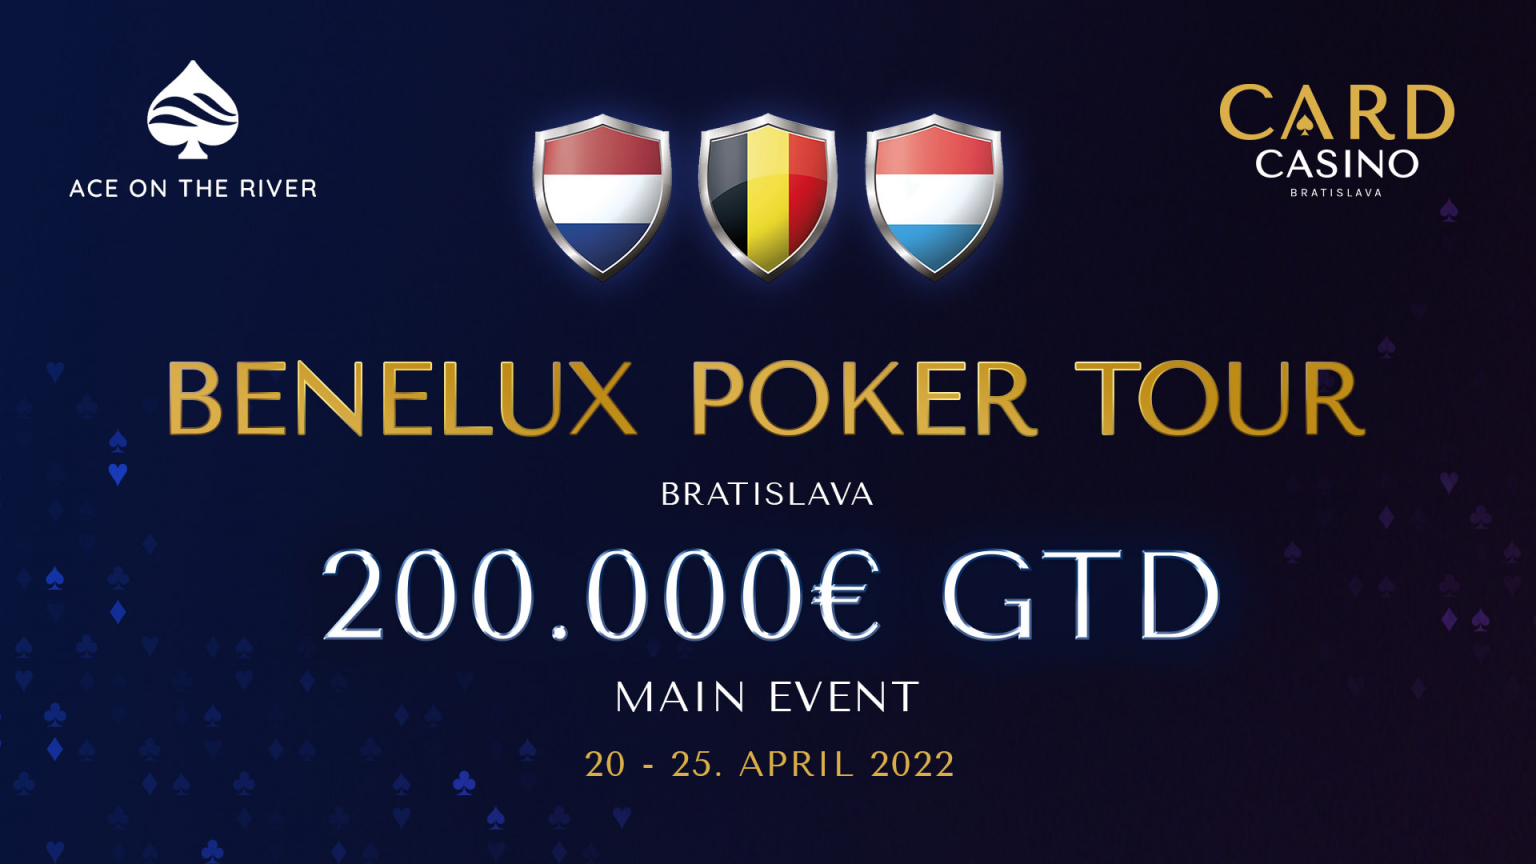 Benelux Poker Tour kicks off after Easter with €200,000 GTD Main Event